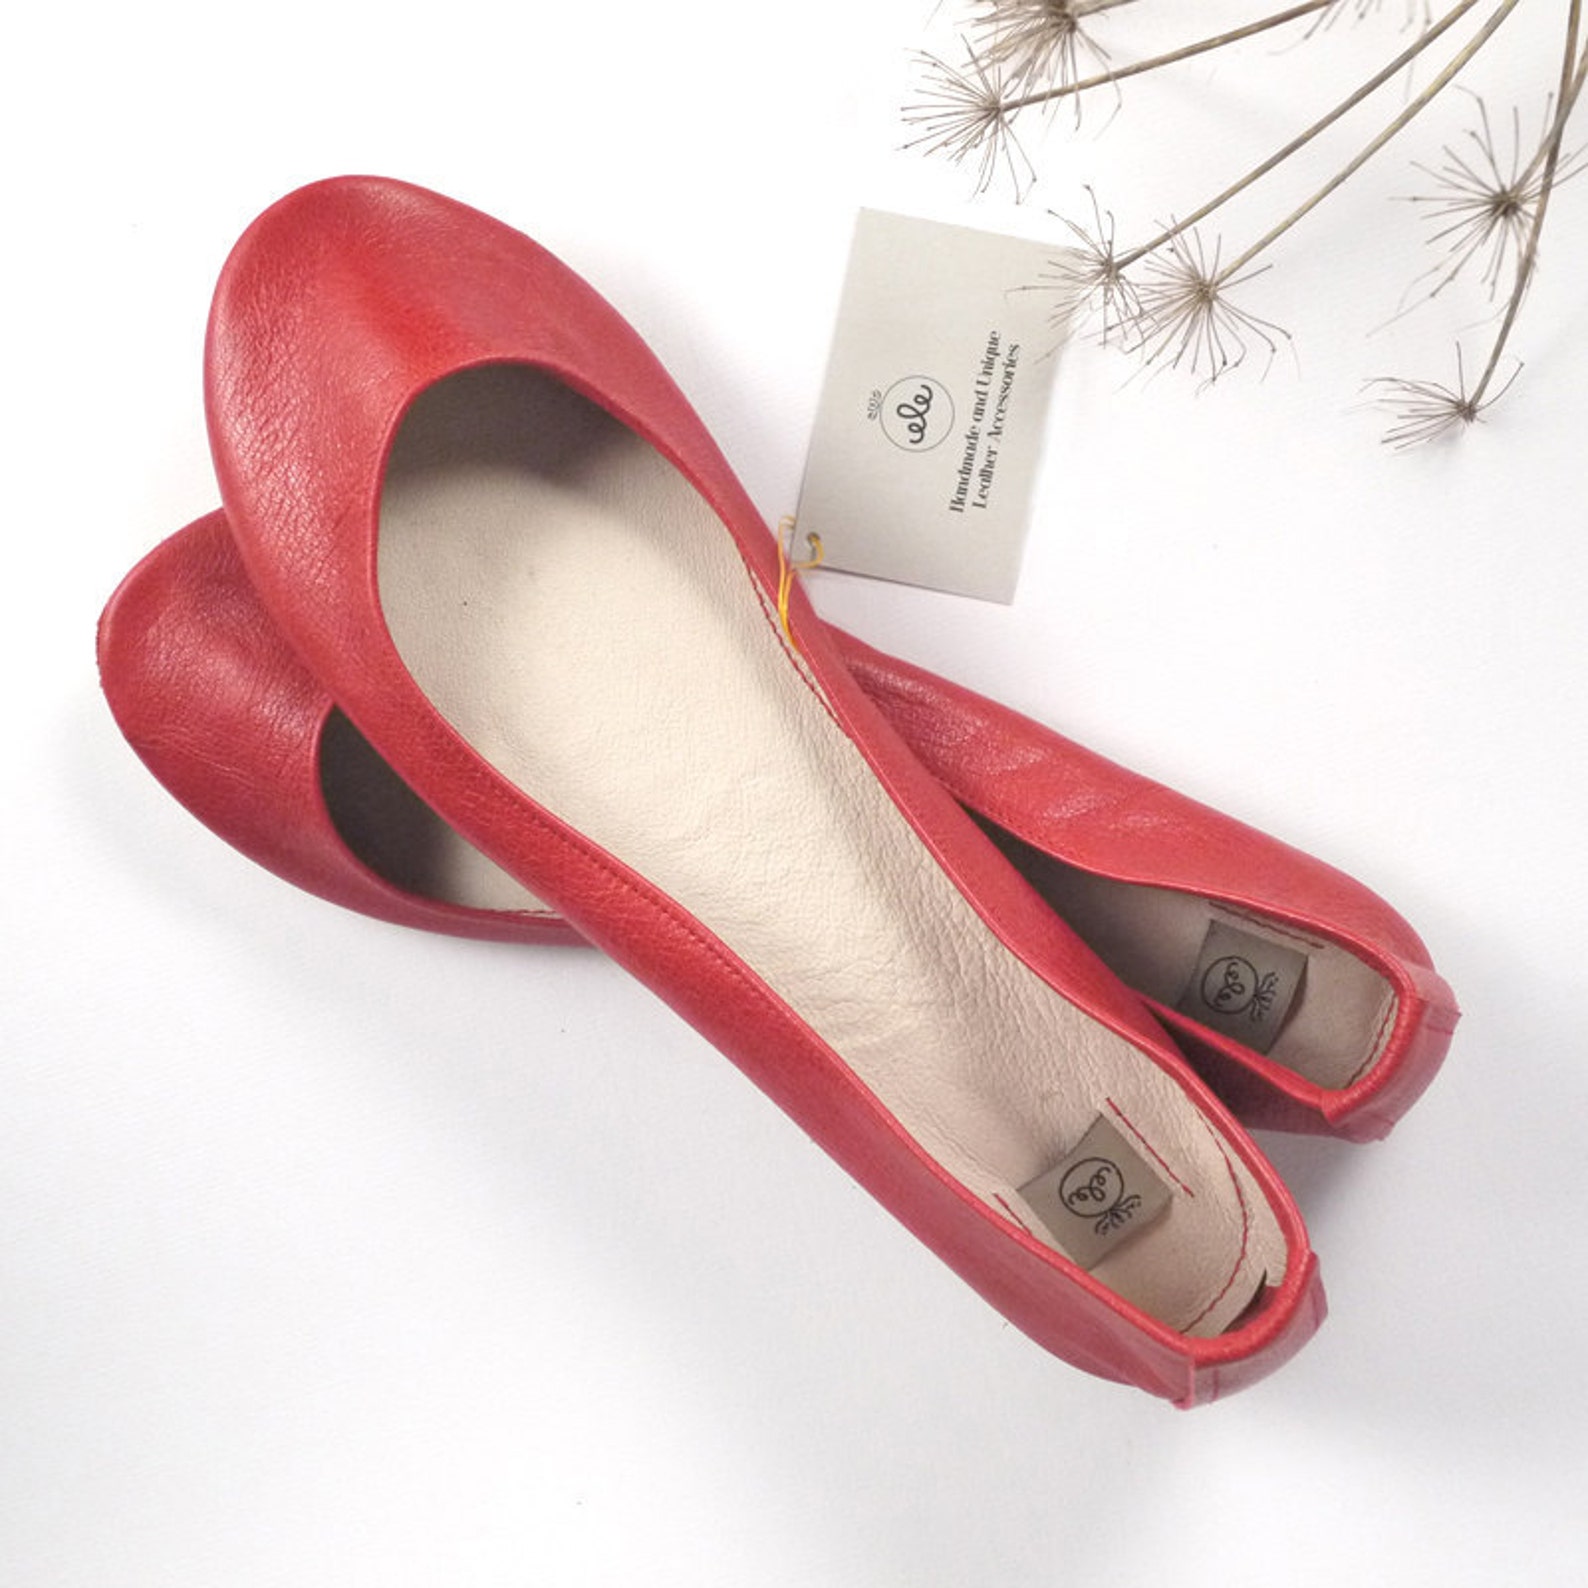 ballet shoes red